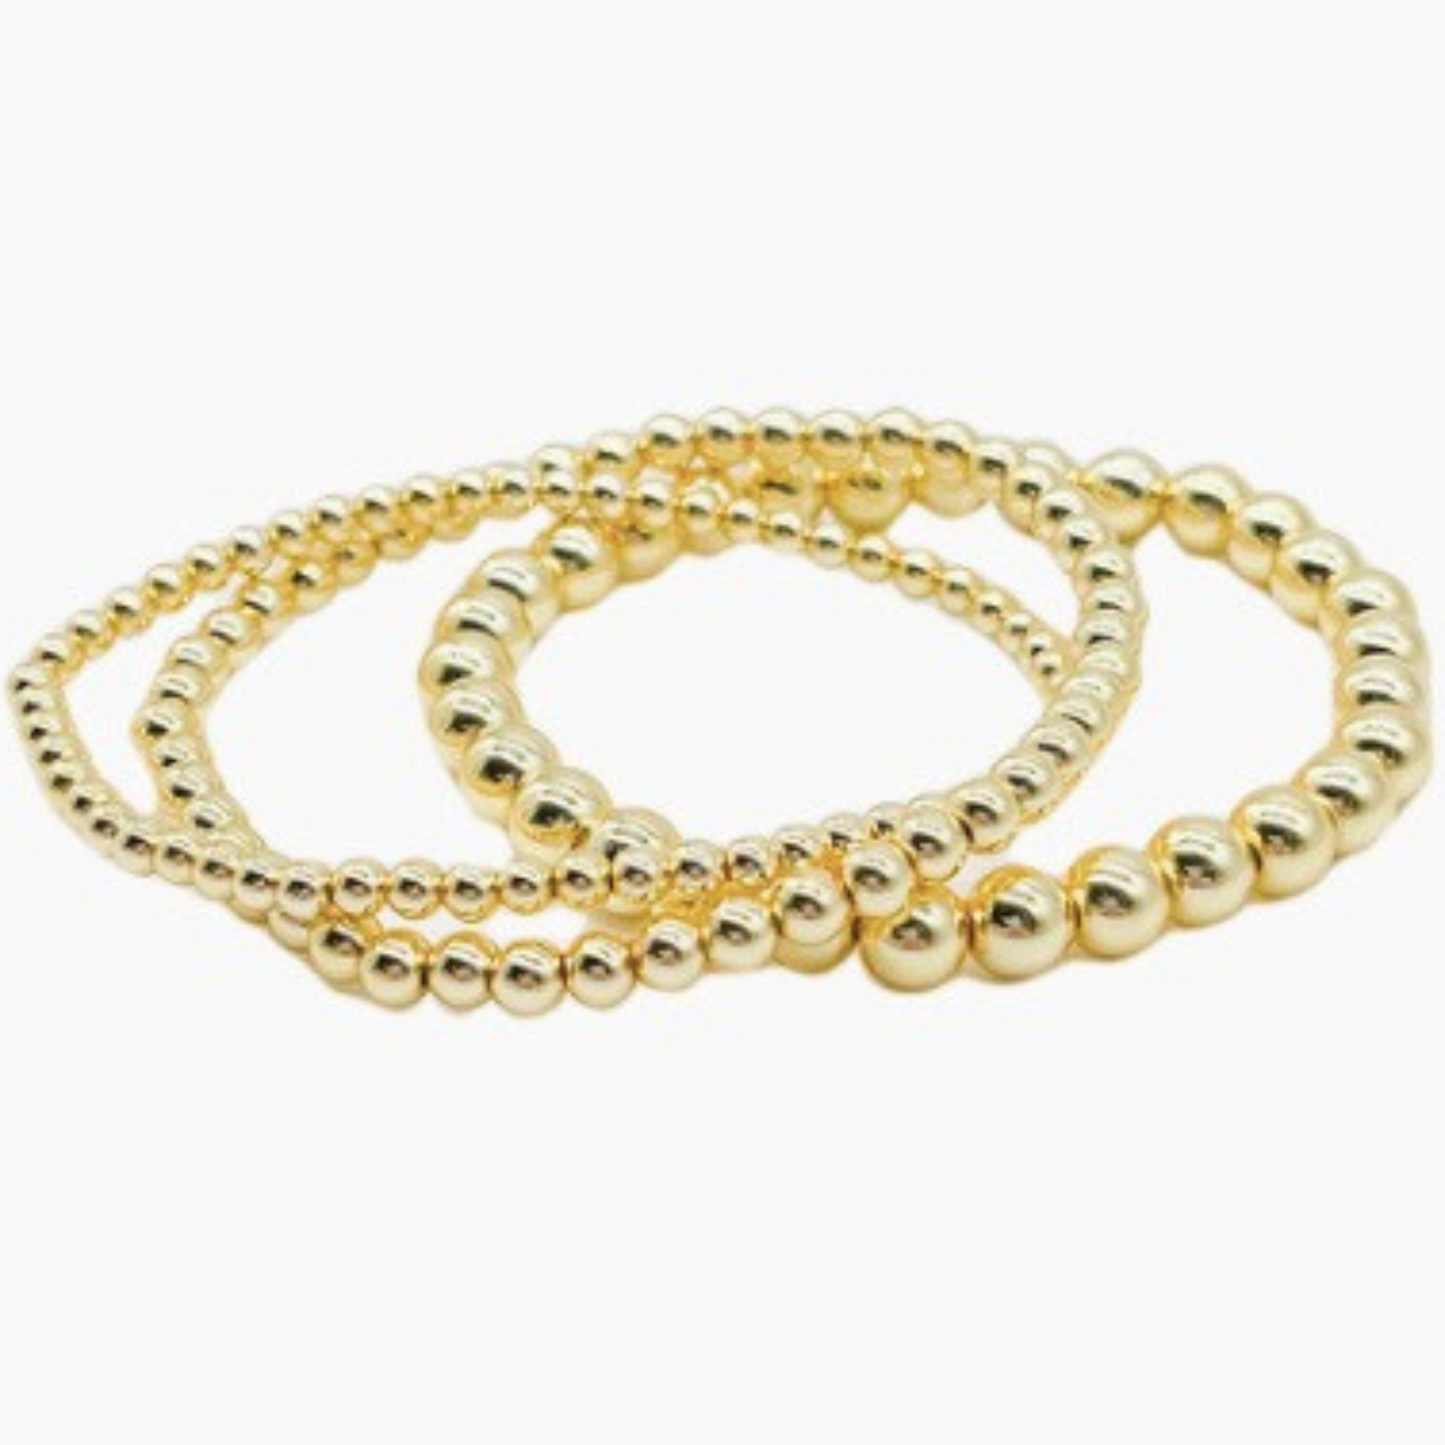 The Caroline Bracelets feature a modern layered look crafted from gold beaded links. The beautiful design allows for a timeless, elegant statement that will easily complement any outfit.